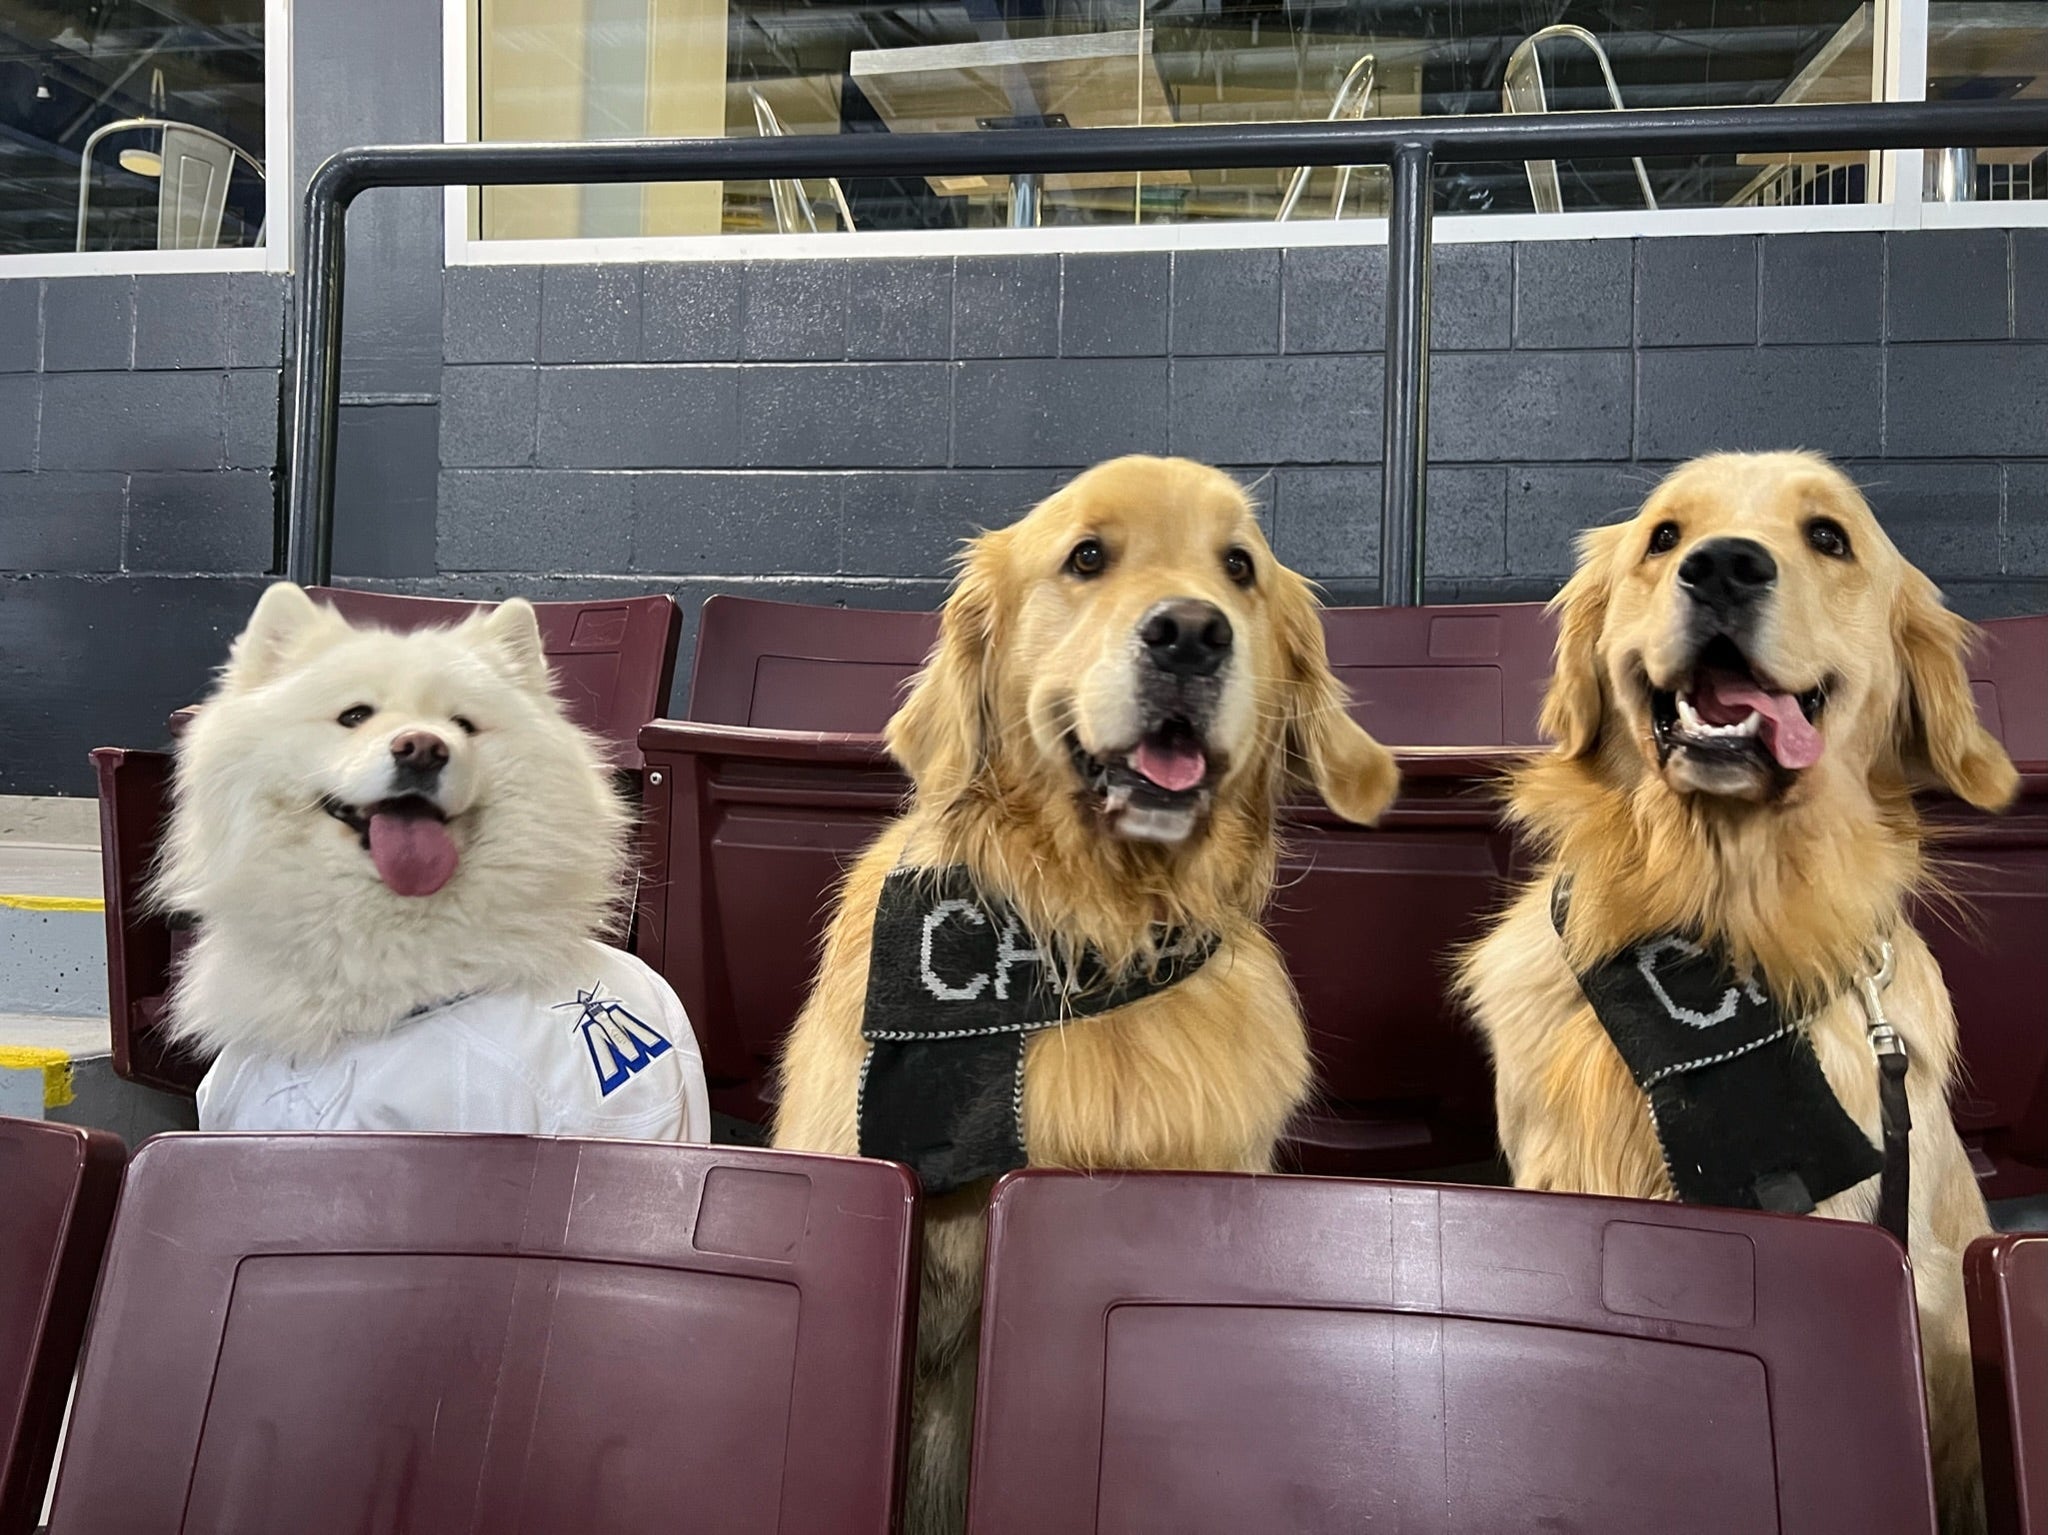 Three dogs sitting in hockey arena seats getting ready to watch the Pucks N' Paws game - an annual Ontario Hockey League dog-friendly hockey game night. 